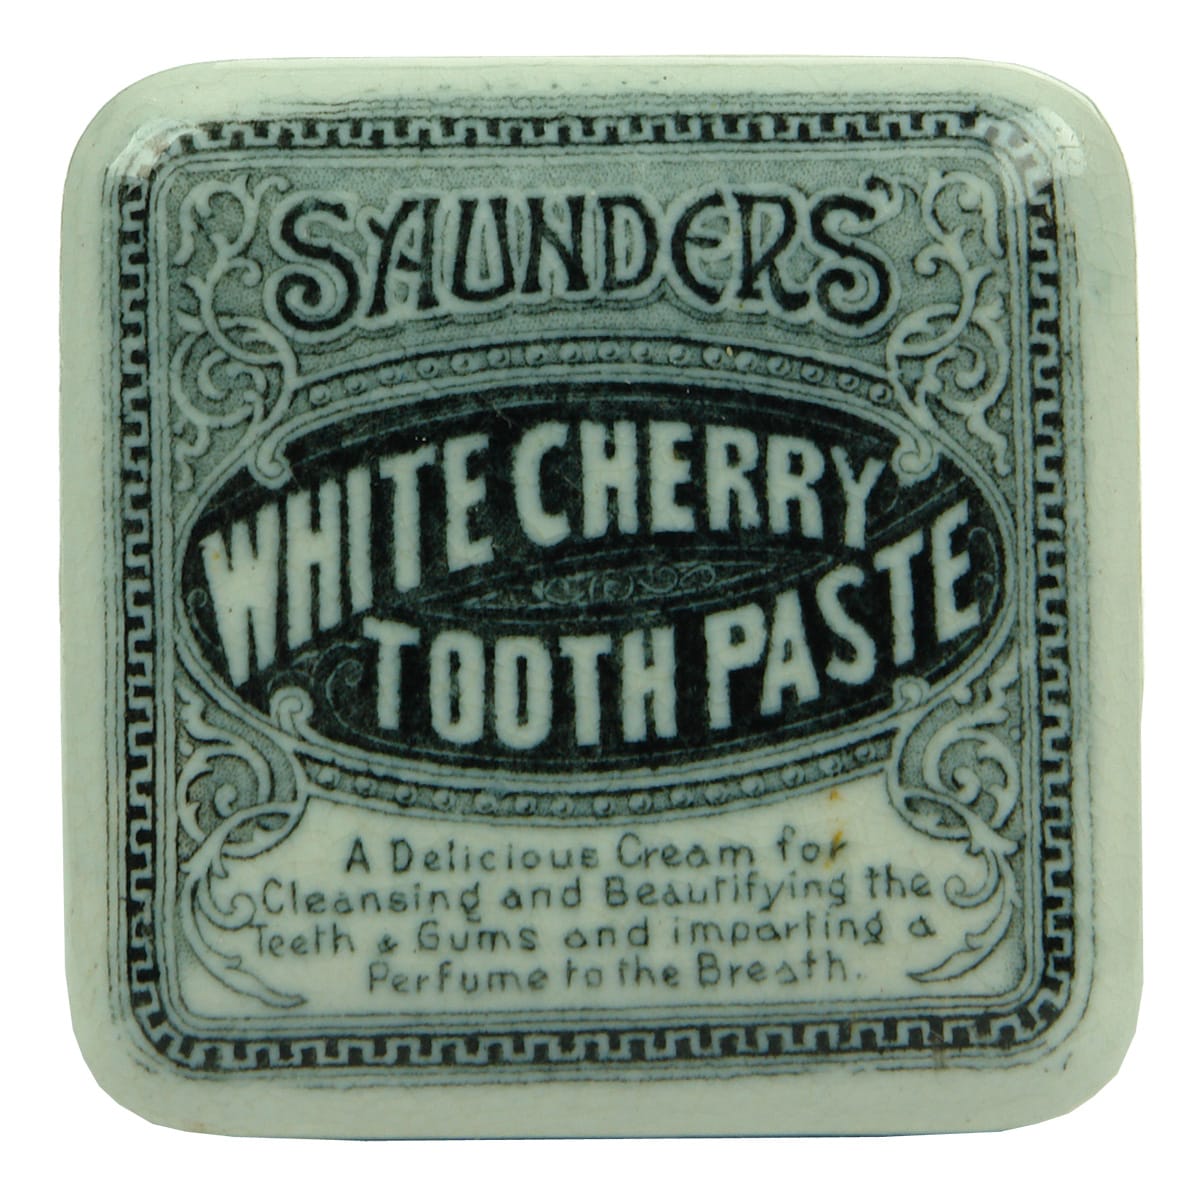 Saunders White Cherry Tooth Paste Pot Lid